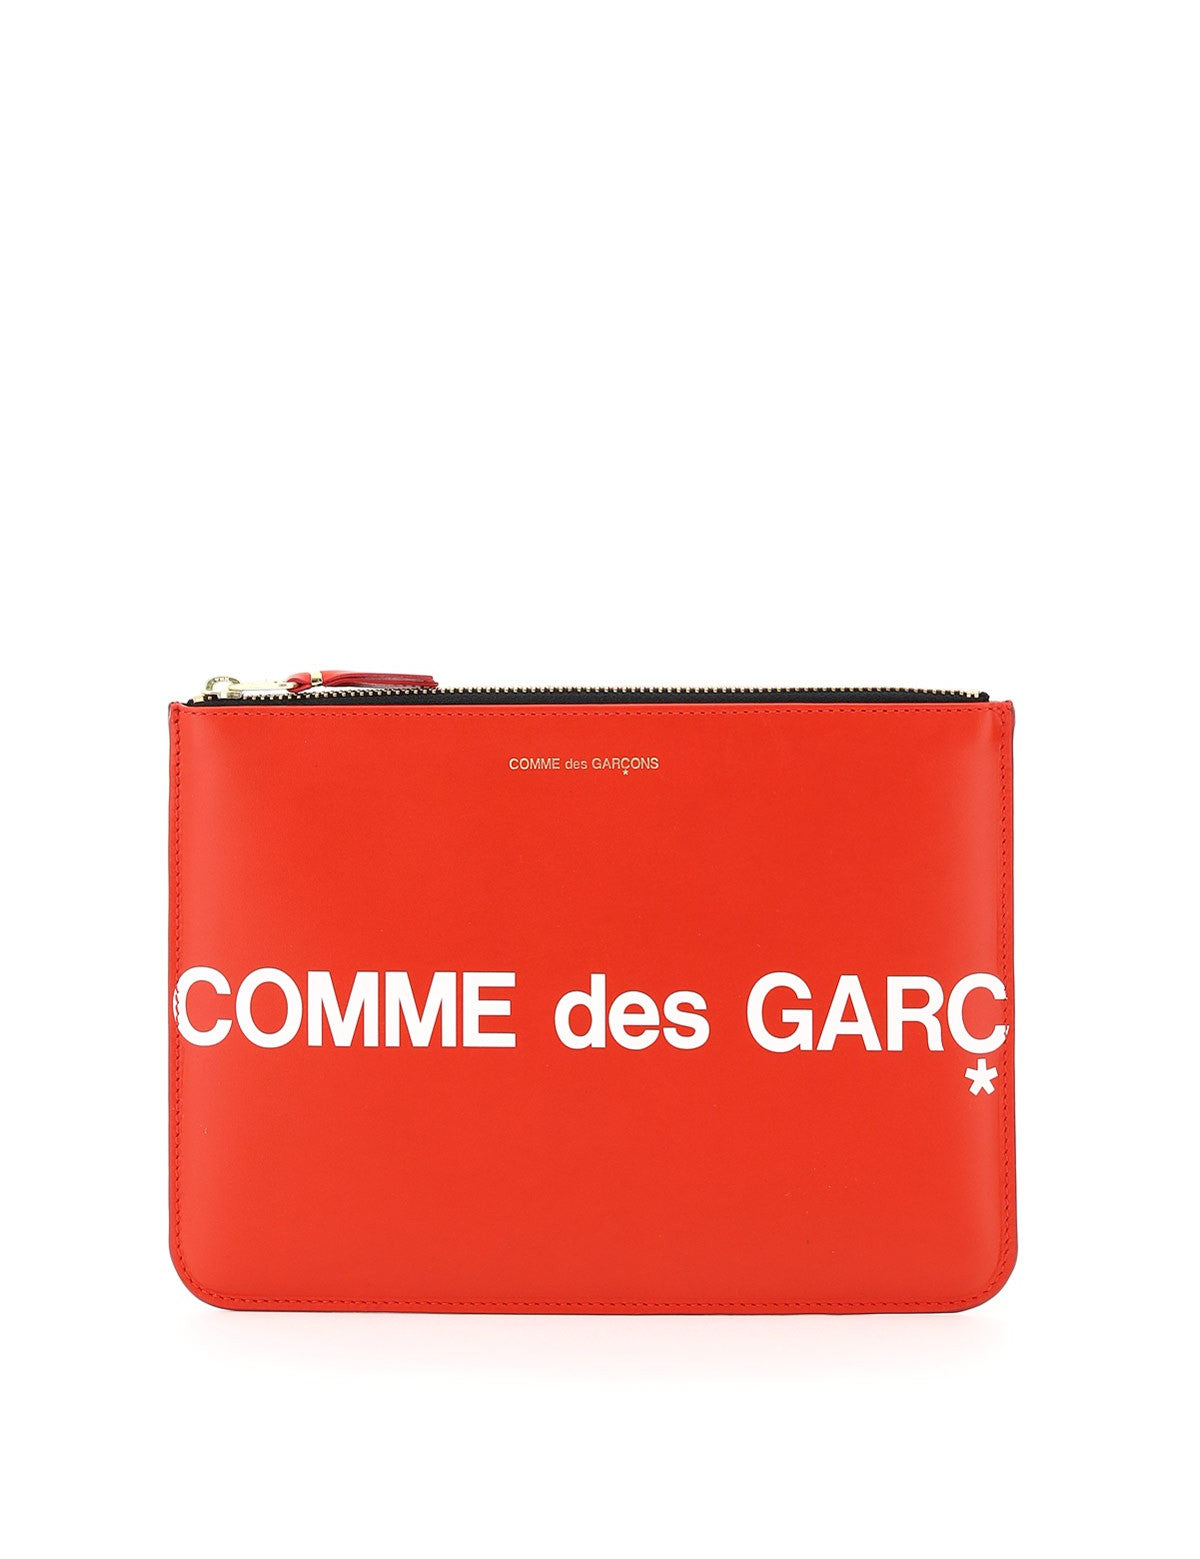 comme-des-garcons-wallet-leather-pouch-with-logo_b66bf8af-97f4-49ee-973f-ddc58b941904.jpg